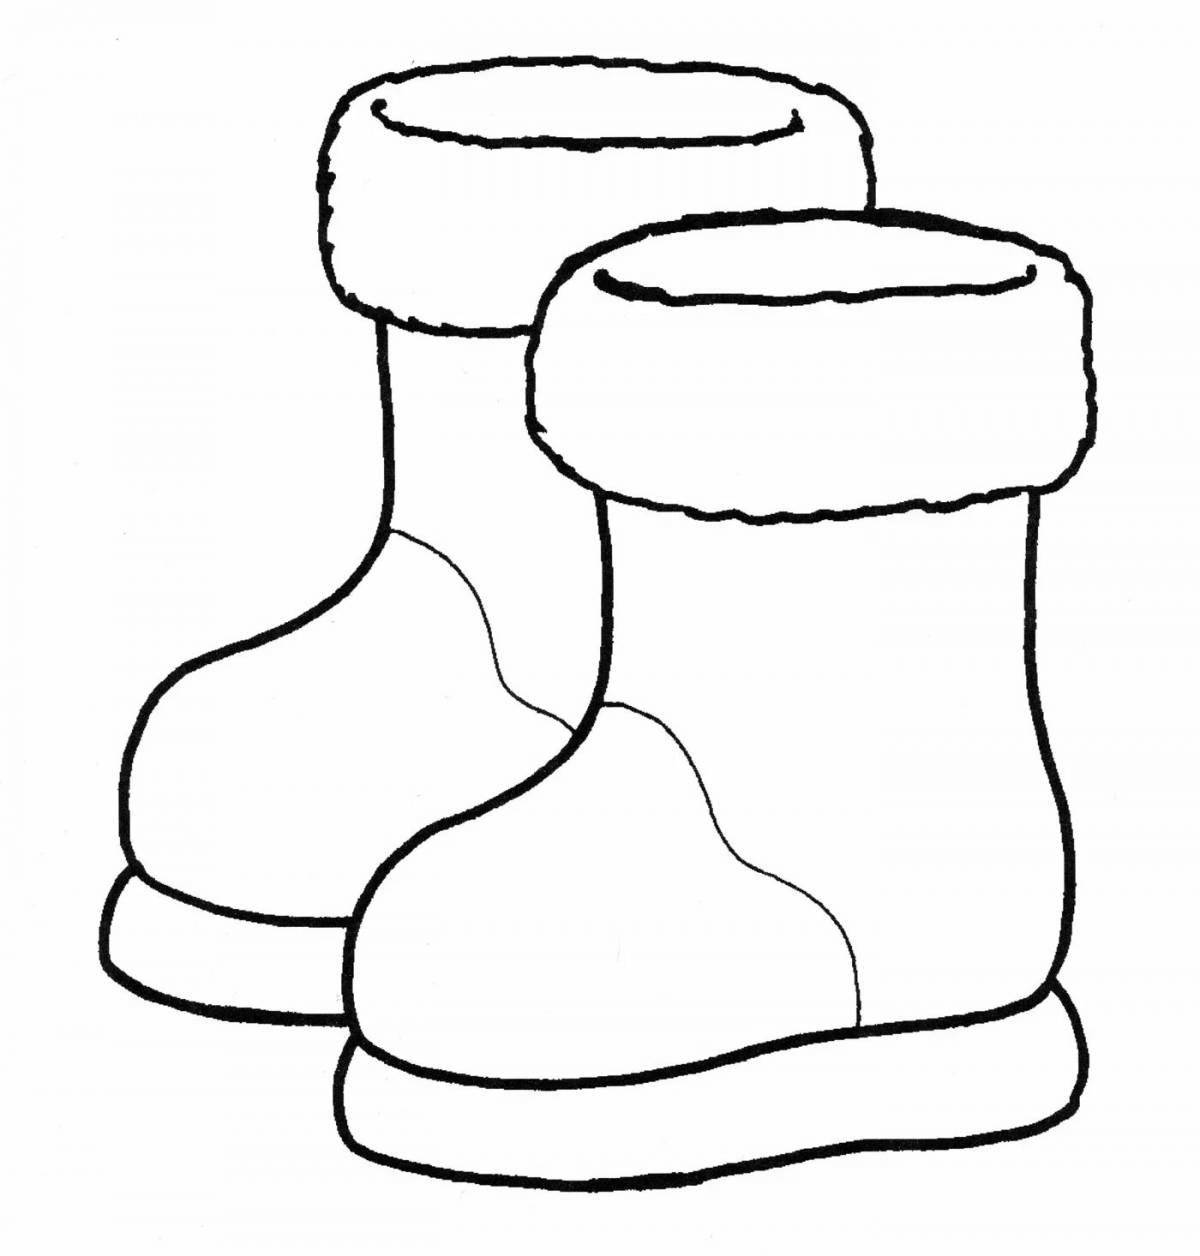 Coloring page of shoes for children 2-3 years old